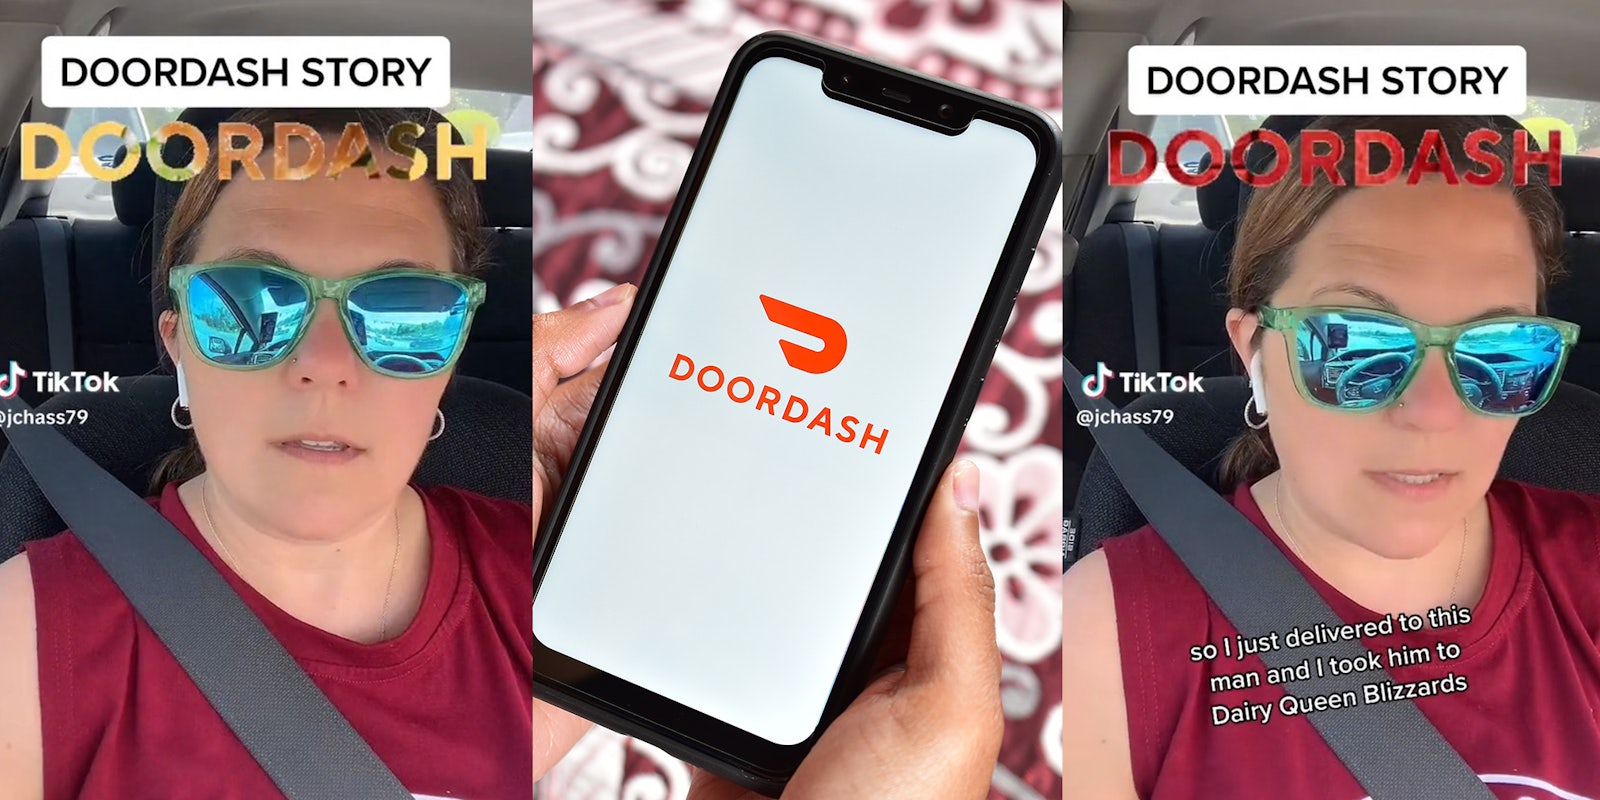 DoorDash Driver explains that after delivering Dairy Queen Blizzards, man asks driver to go to AutoZone